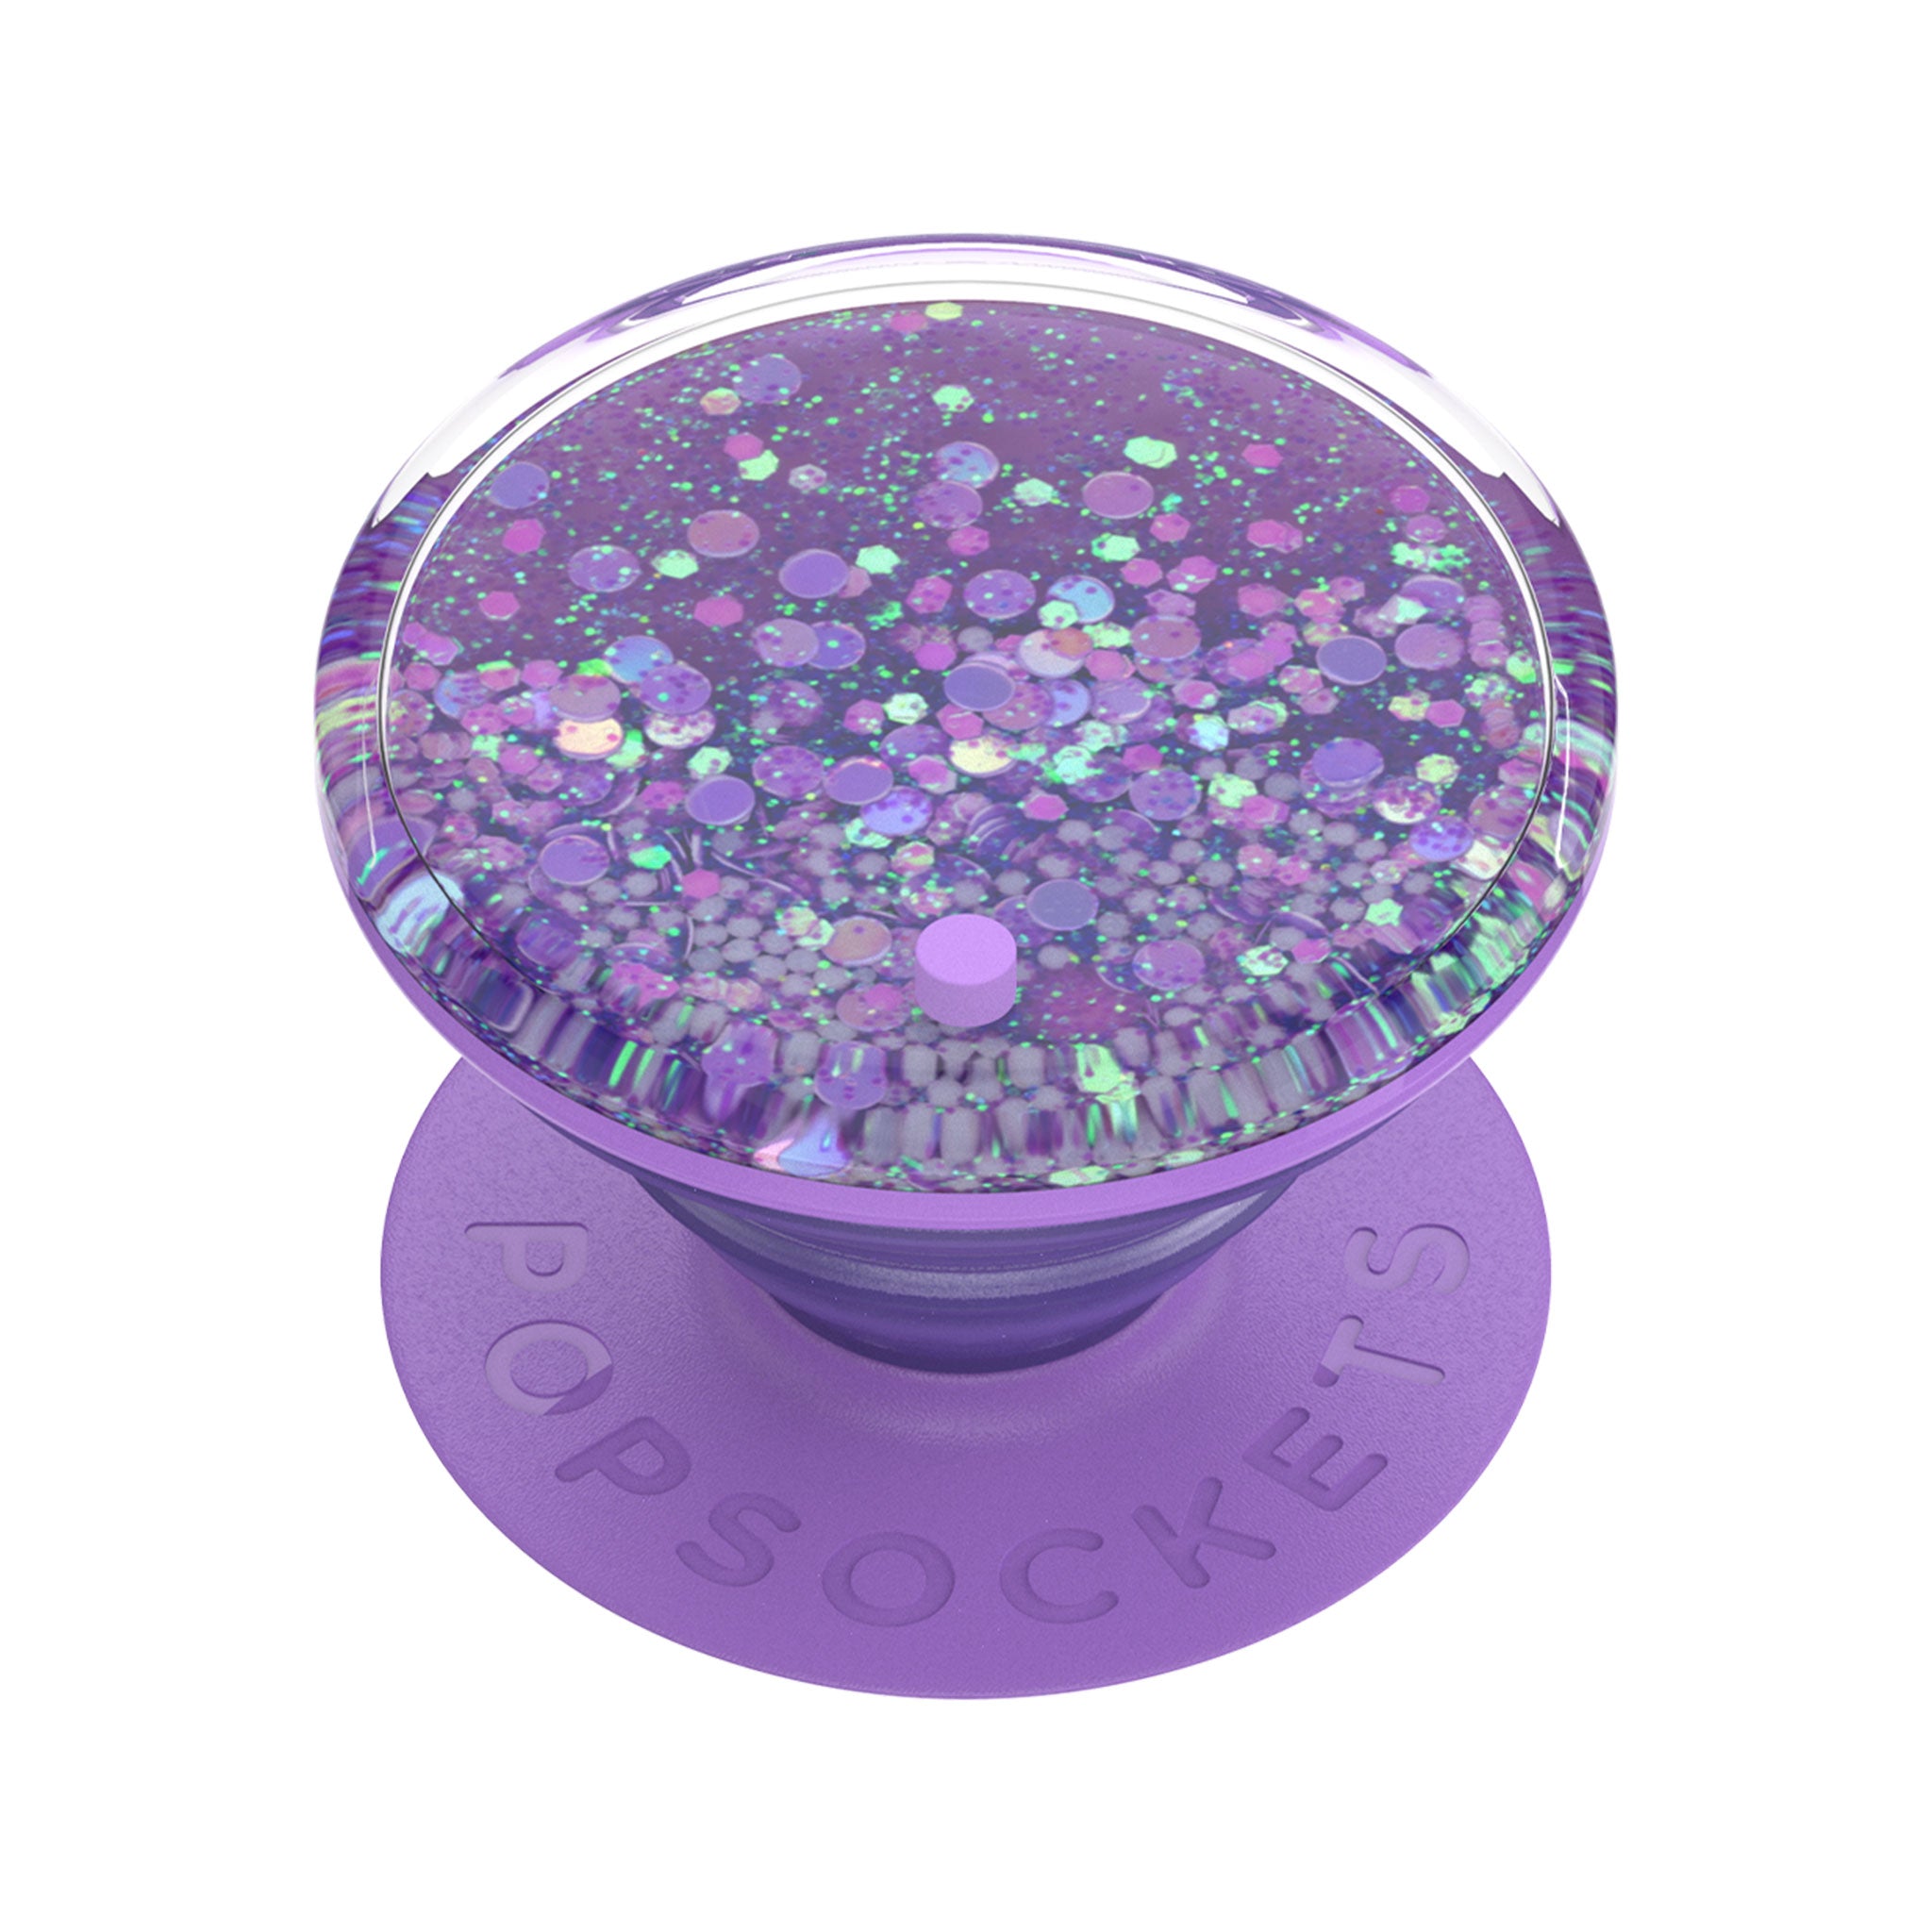 Popsockets - Popgrip Luxe - Tidepool Lavender